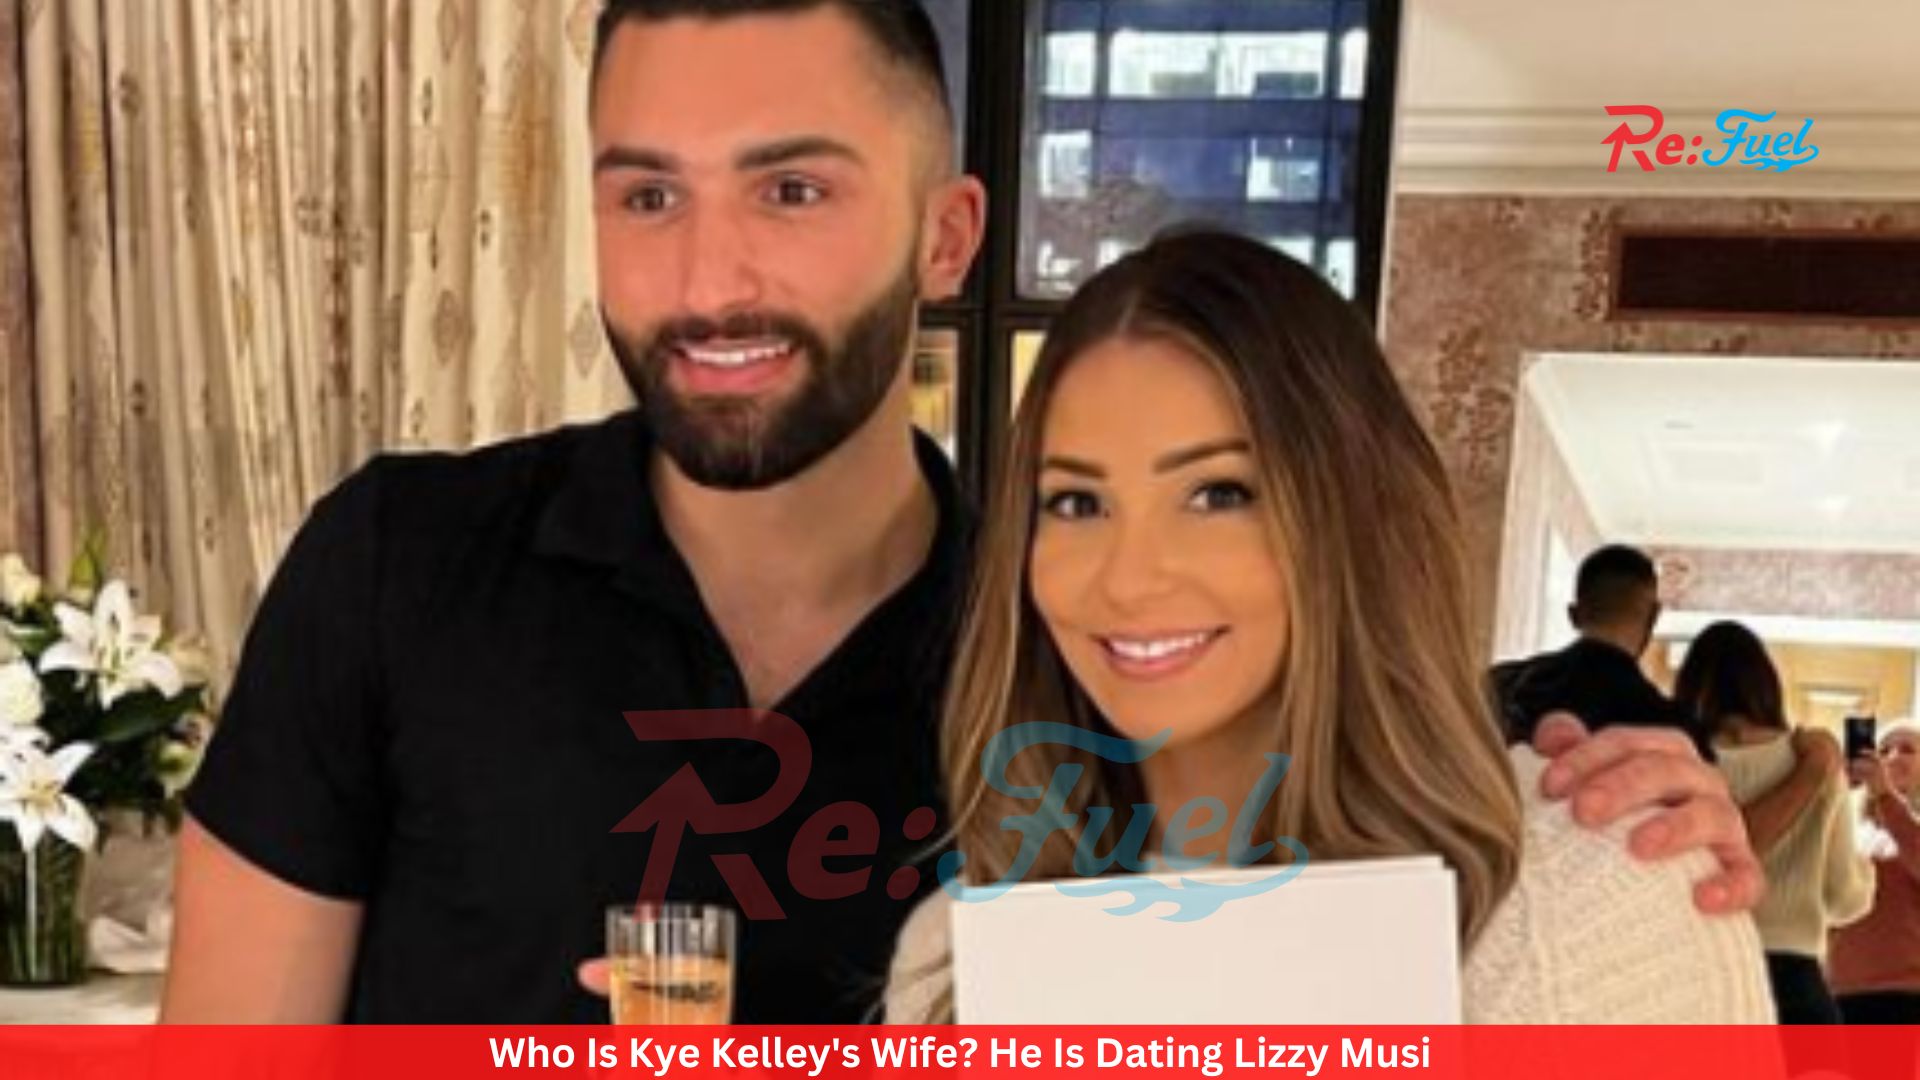 Who Is Kye Kelley's Wife? He Is Dating Lizzy Musi